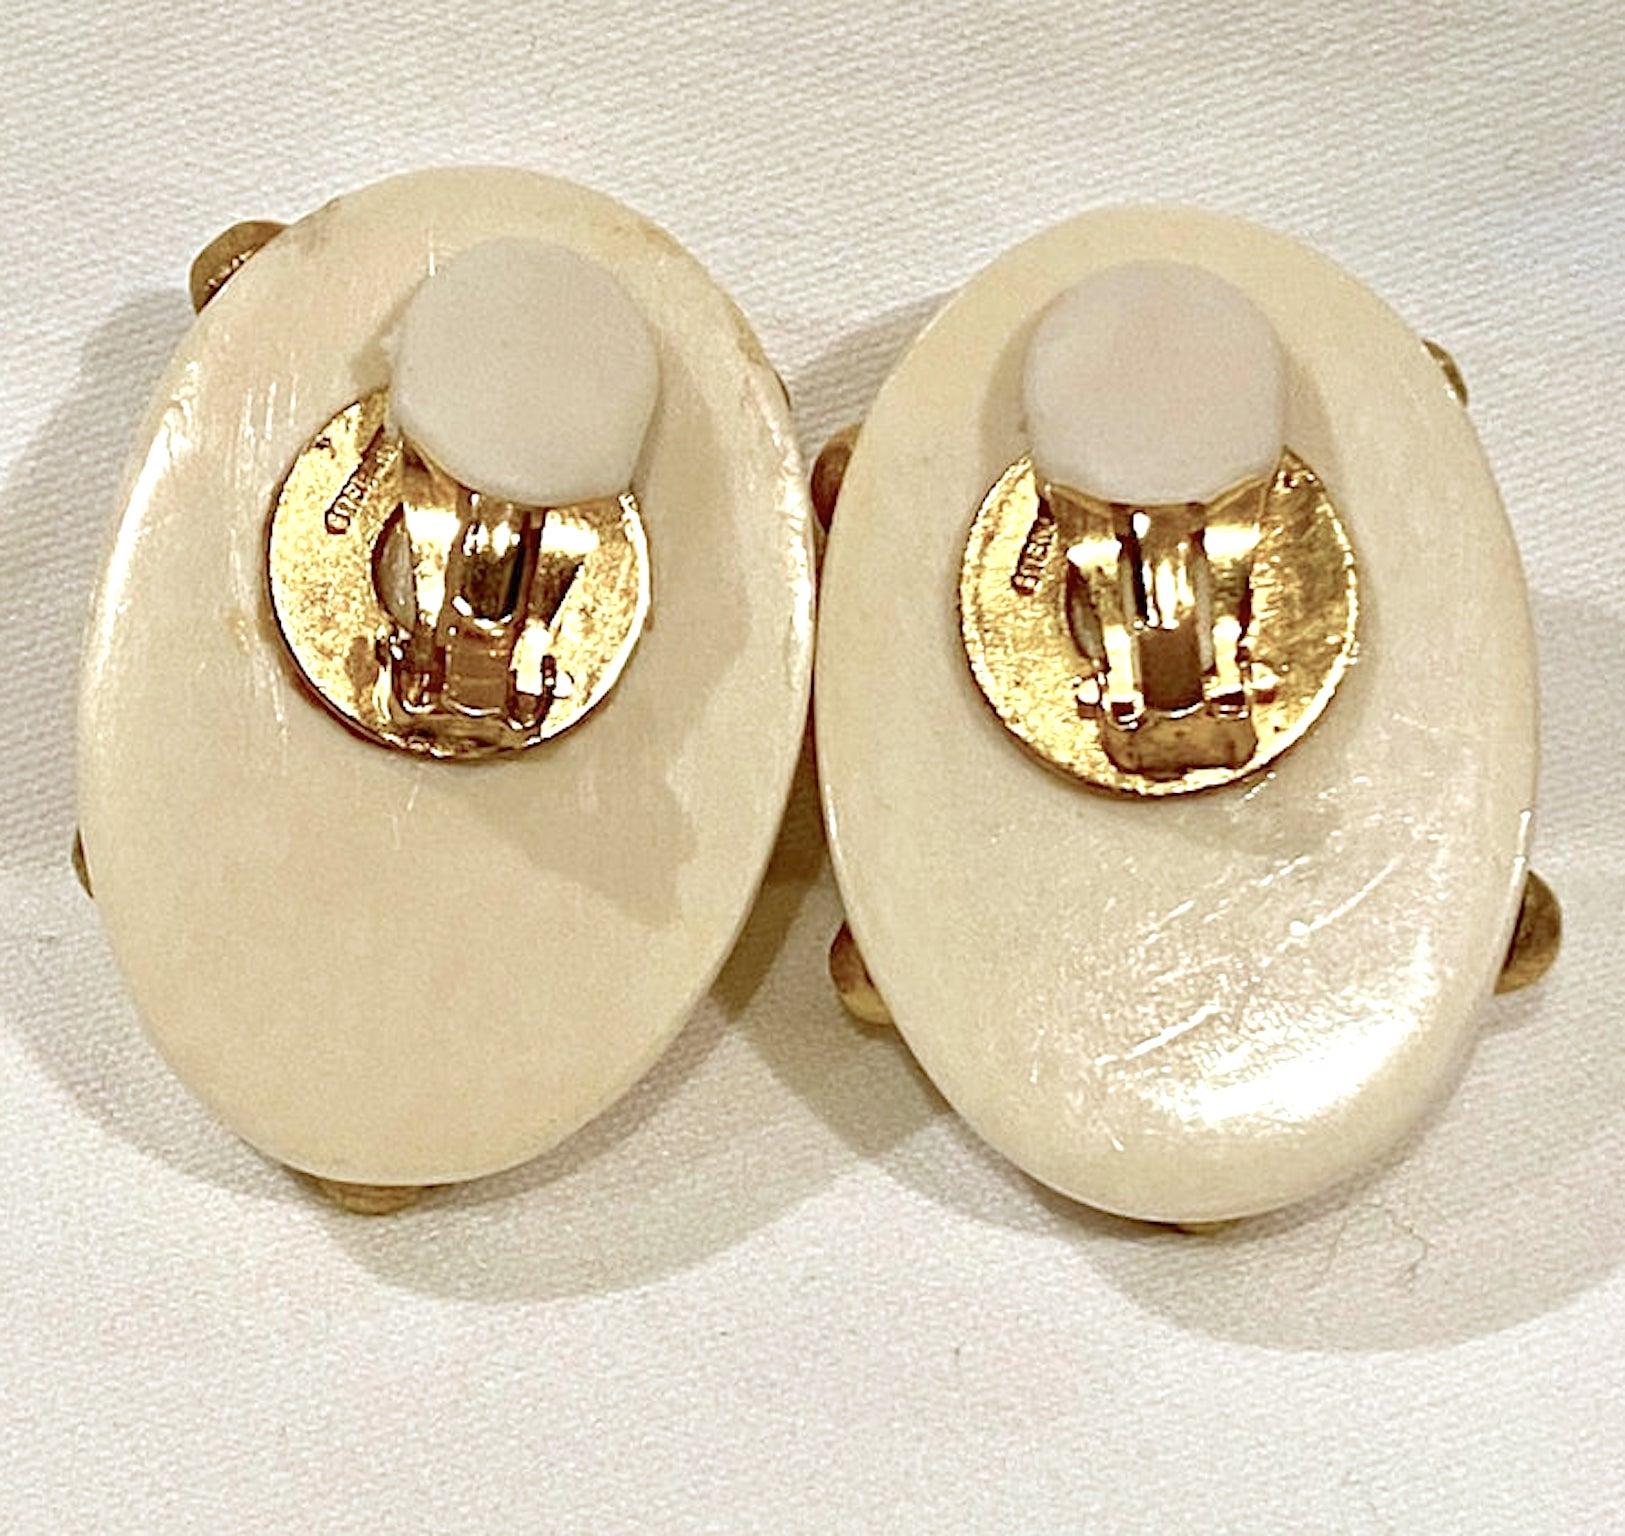 A stunning pair of late 1970s to early 1980s Patricia Von Musulim earring in bone with gold on sterling silver vermeil studs. Each oval dome earrings has a clip back and measures 1.25 inches wide, 1.75 inches tall and .75 of an inch high not